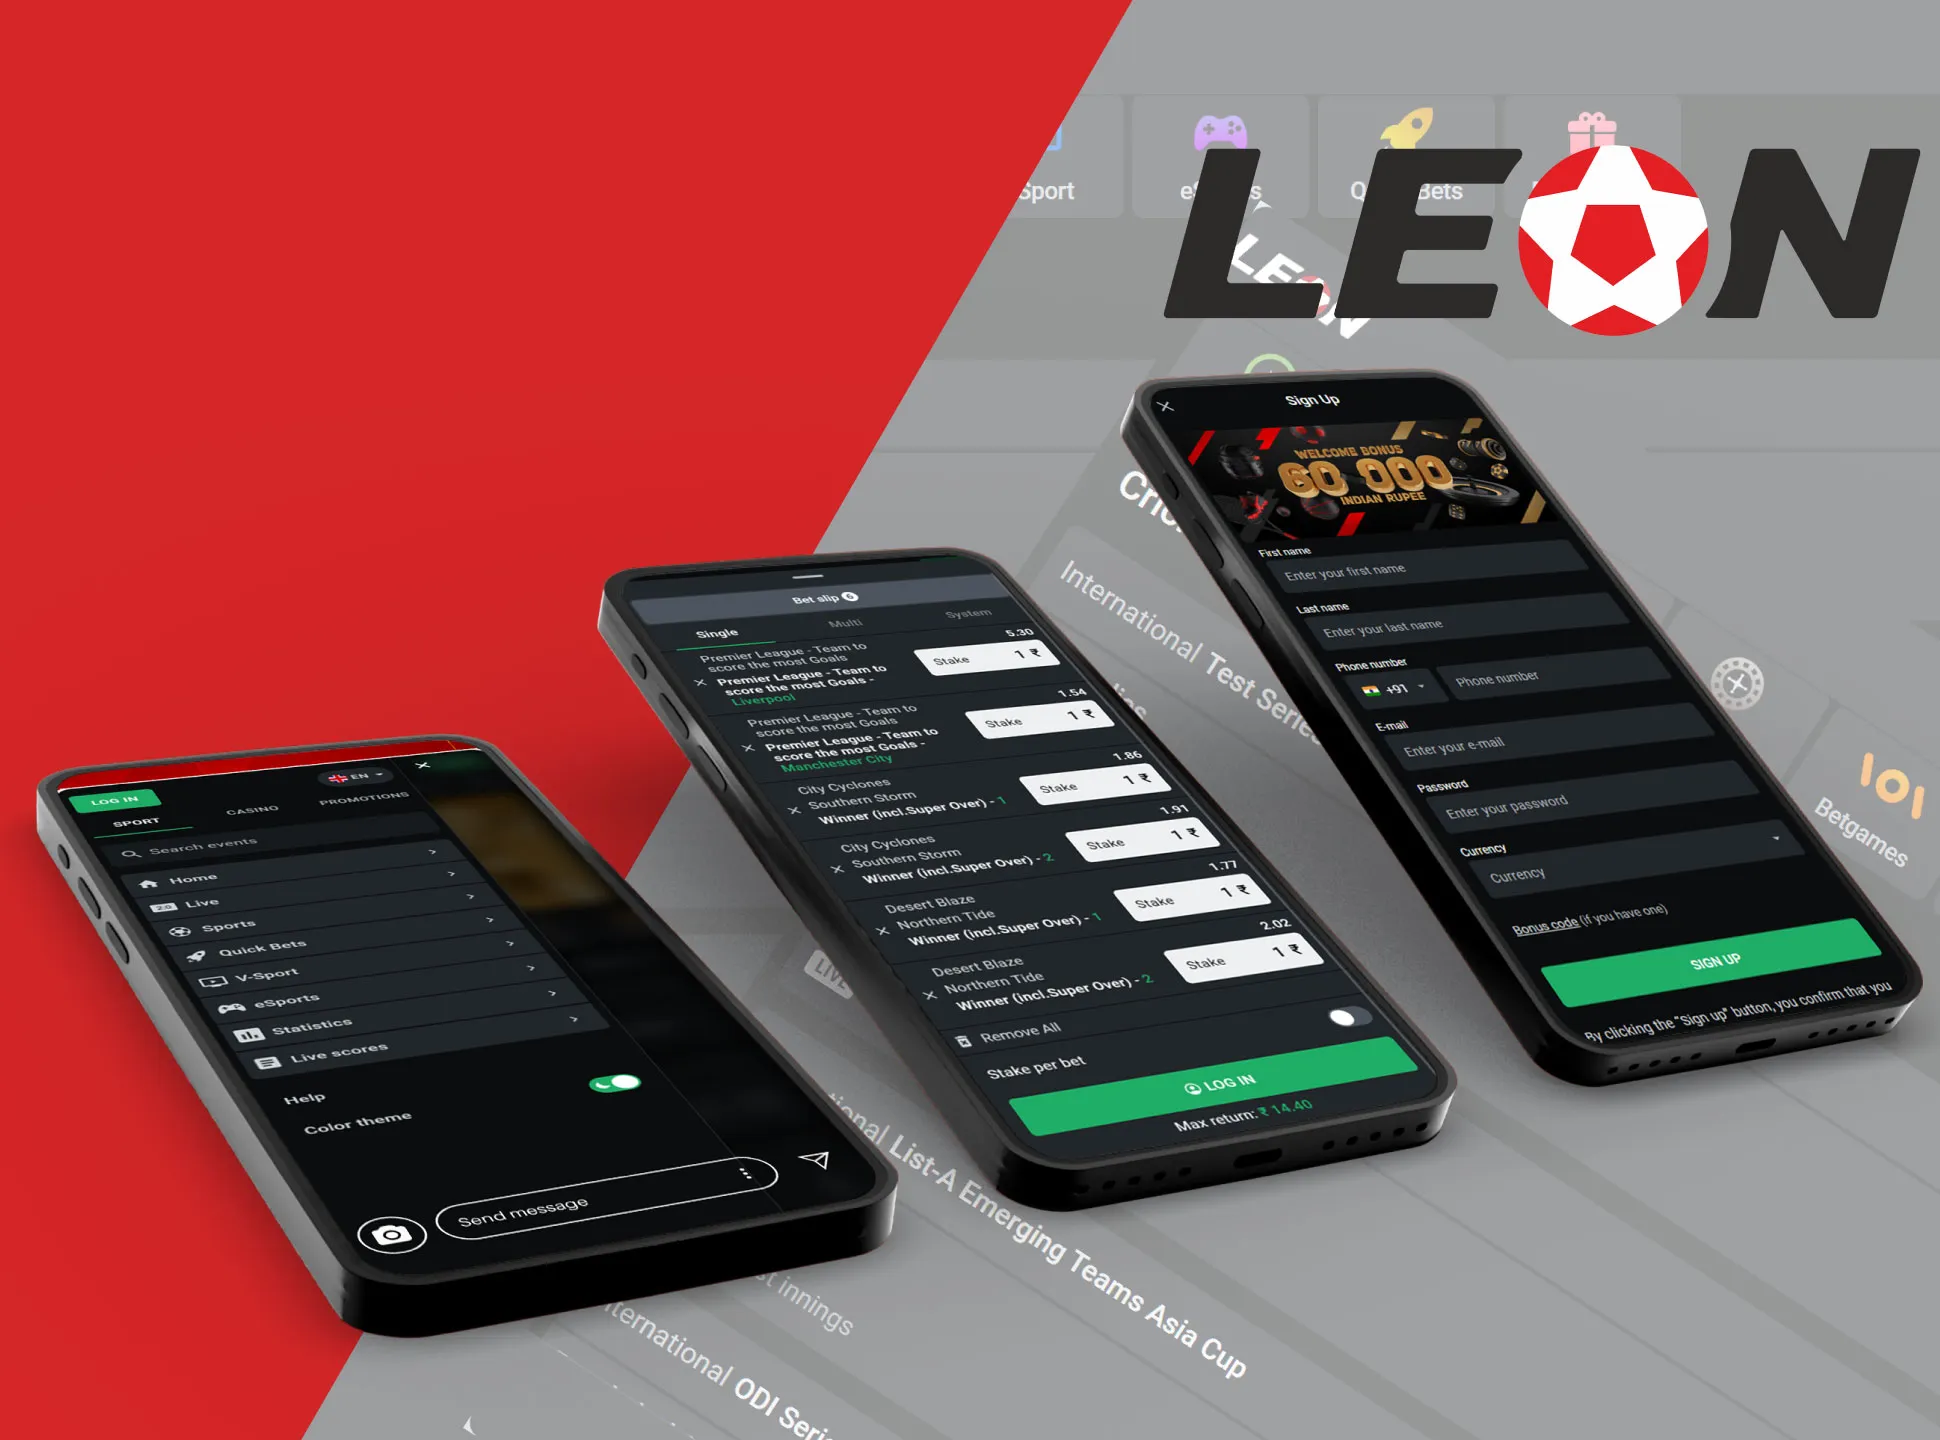 Use the mobile version of the Leonbet website on any mobile device.